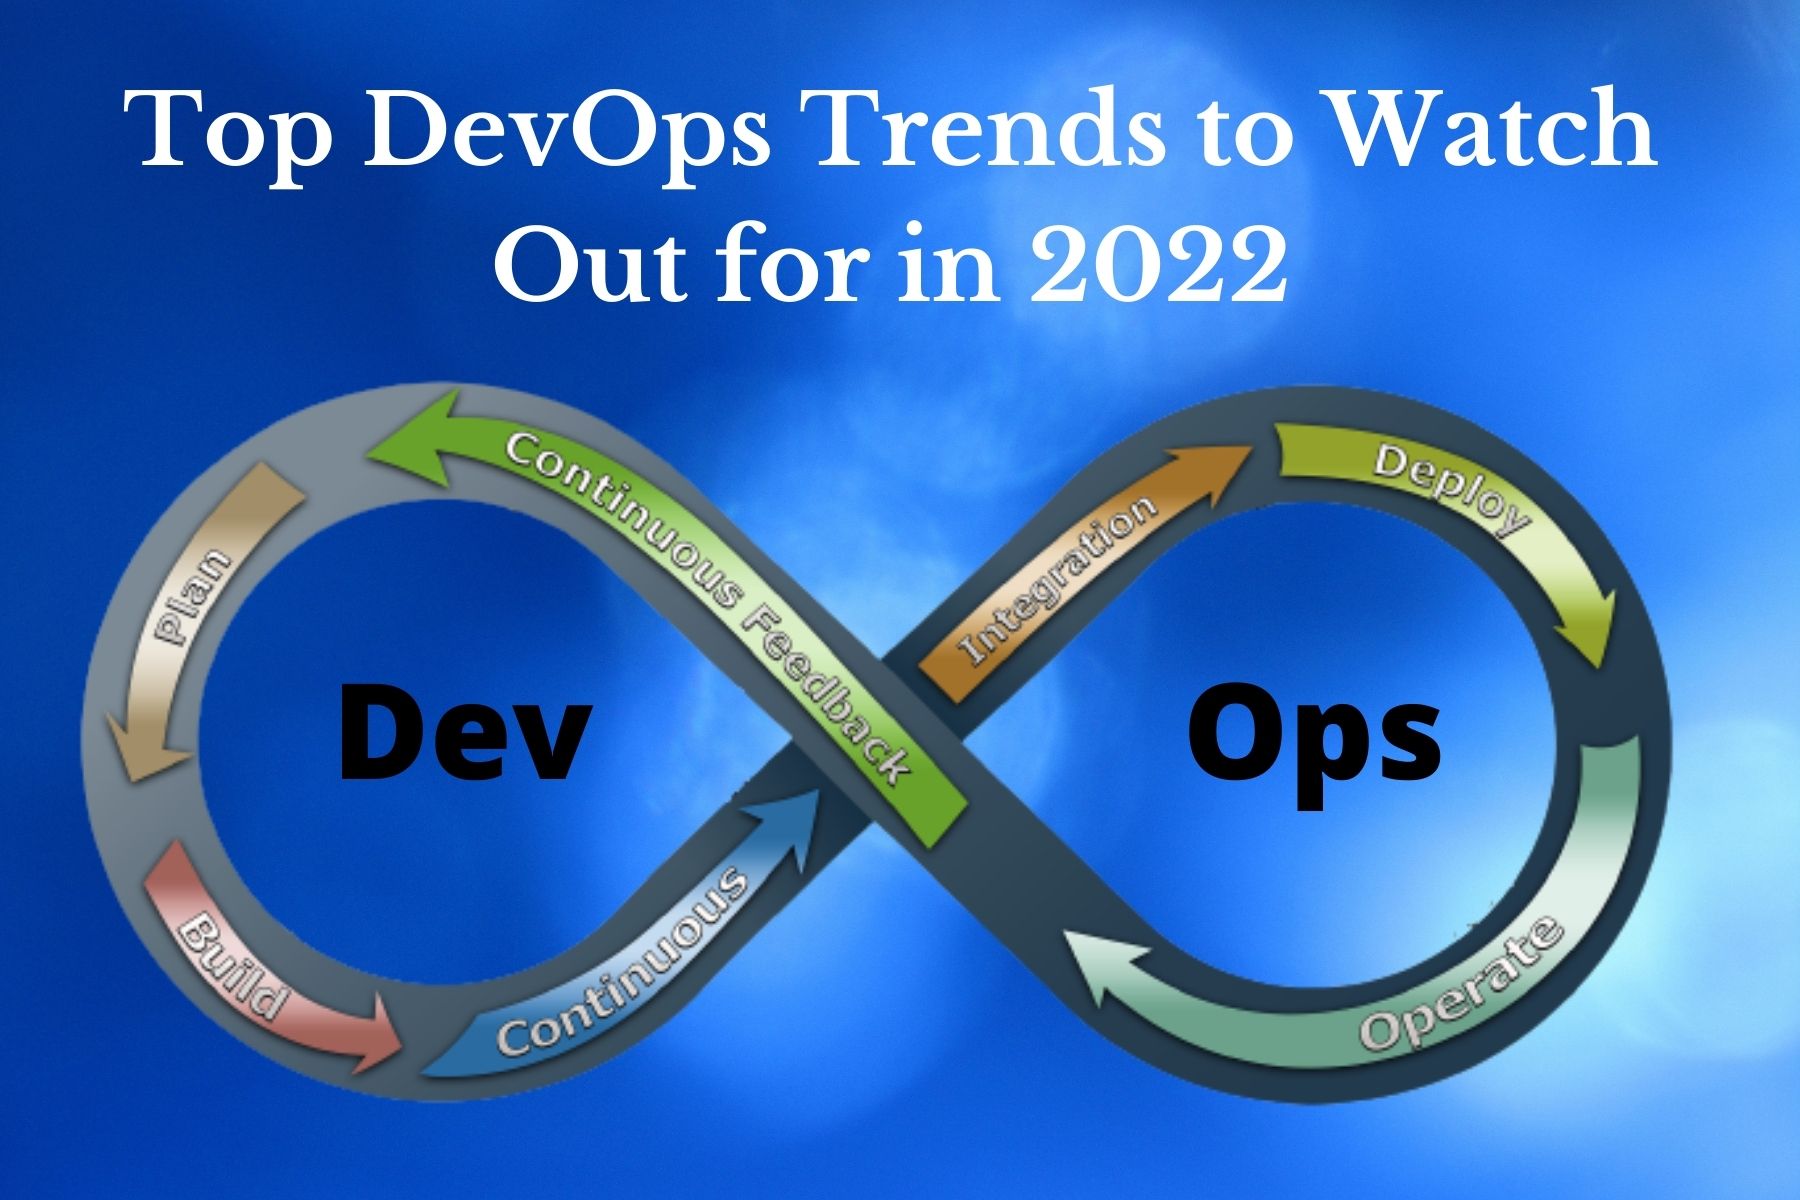 Top DevOps Trends to Watch Out for in 2022